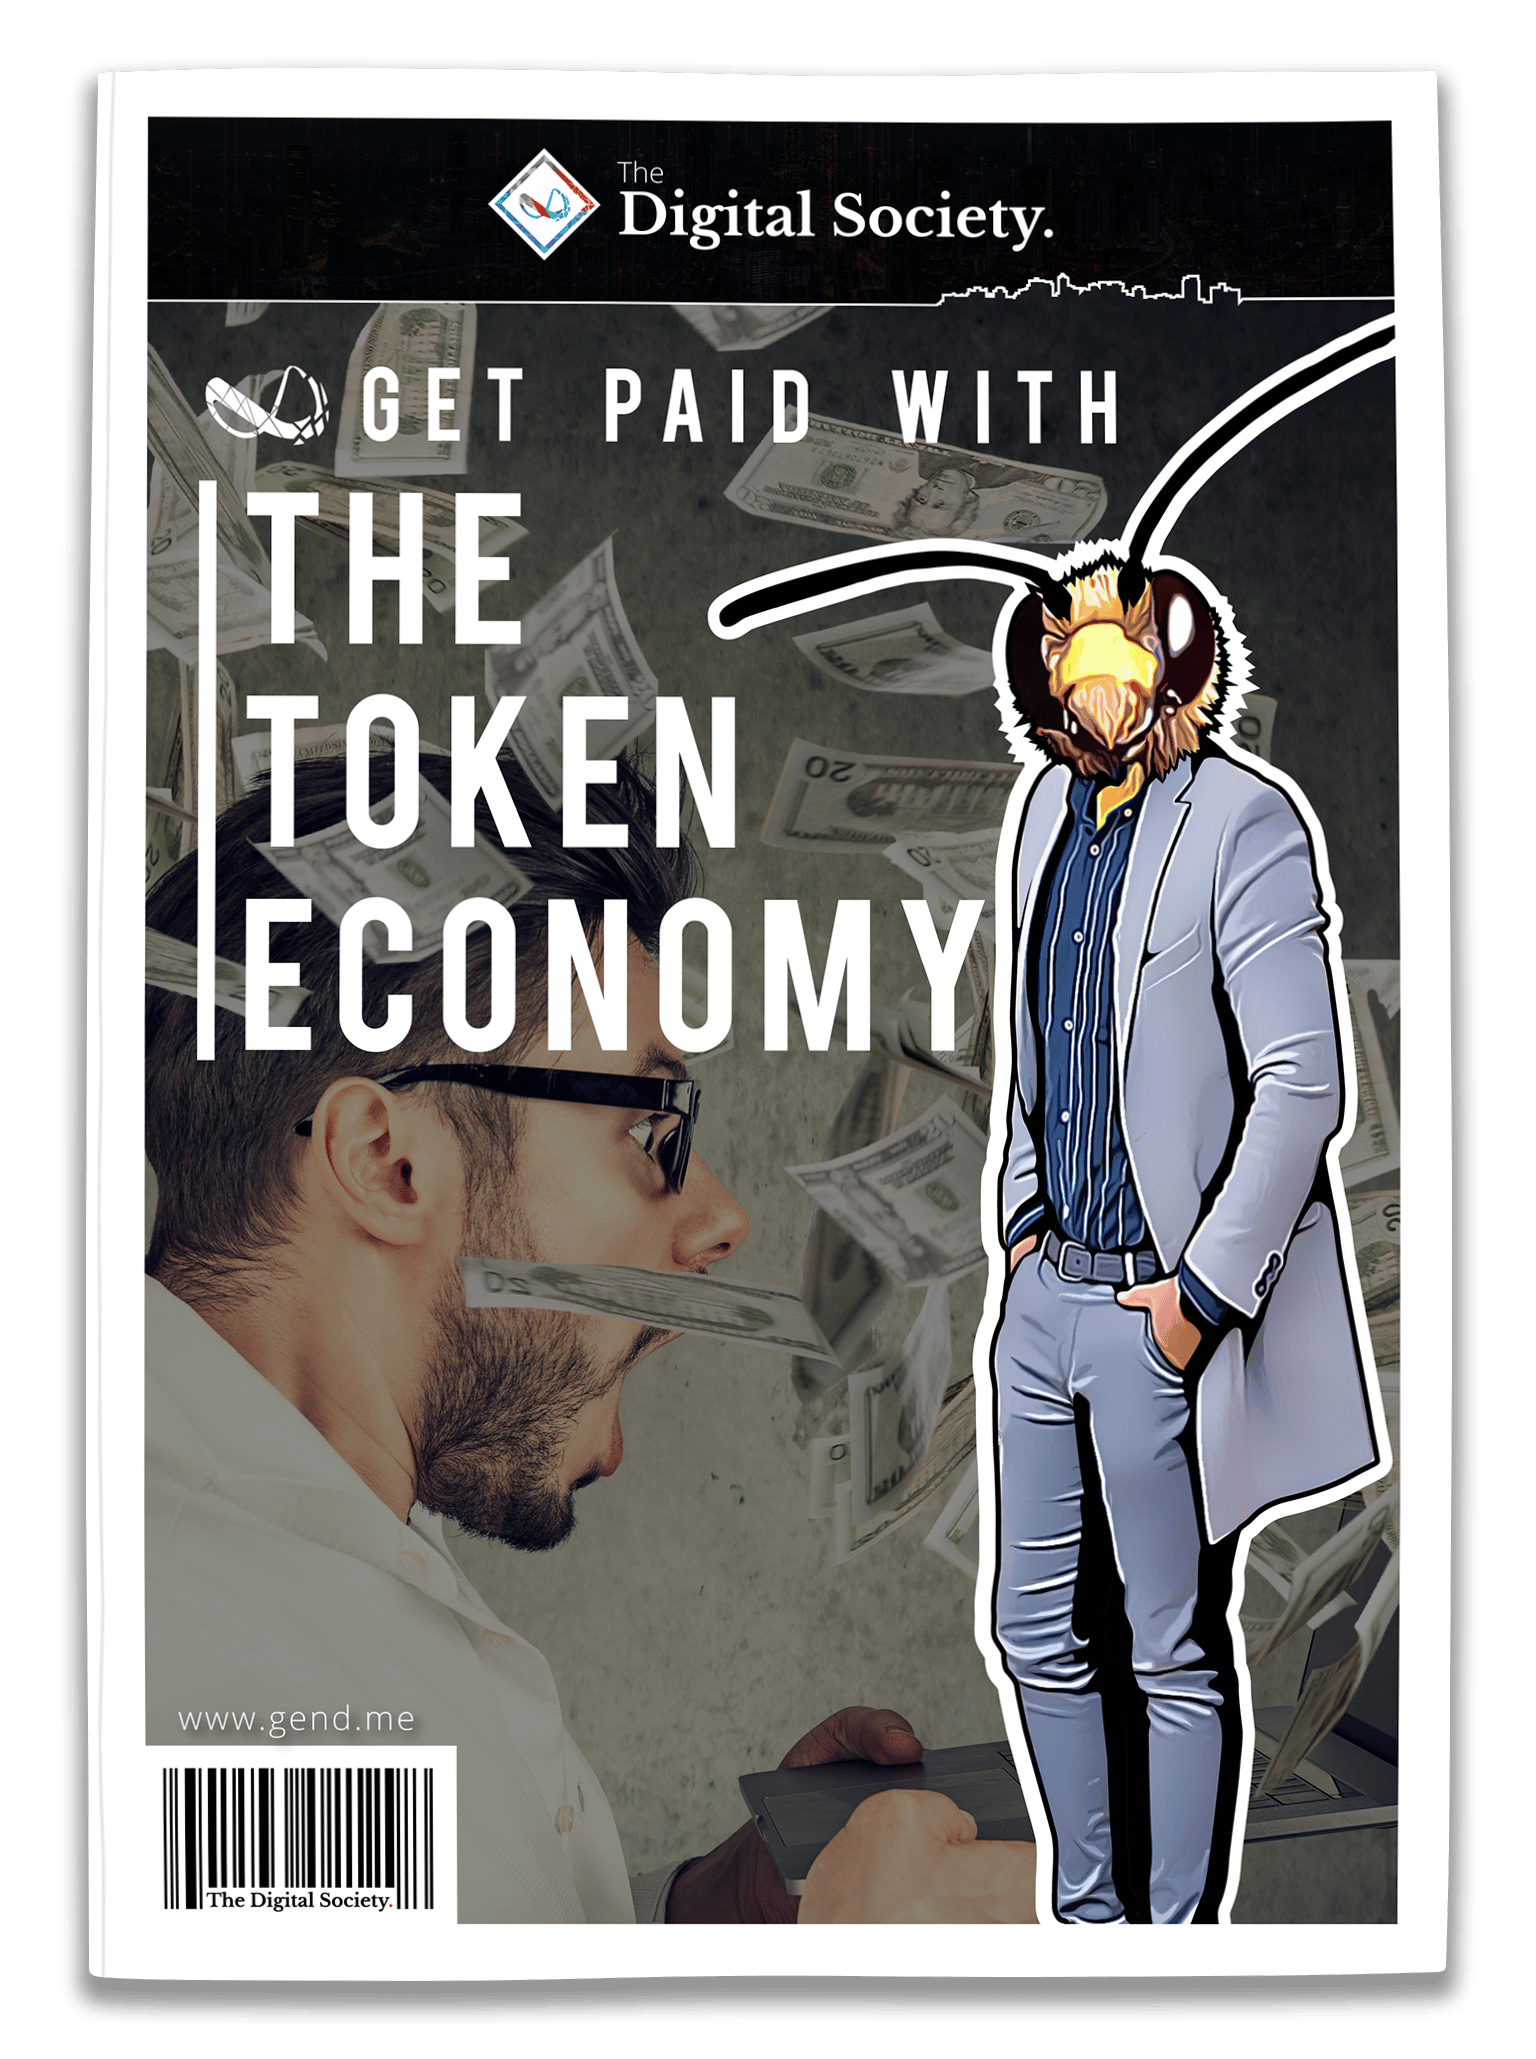 Get paid with the token economy